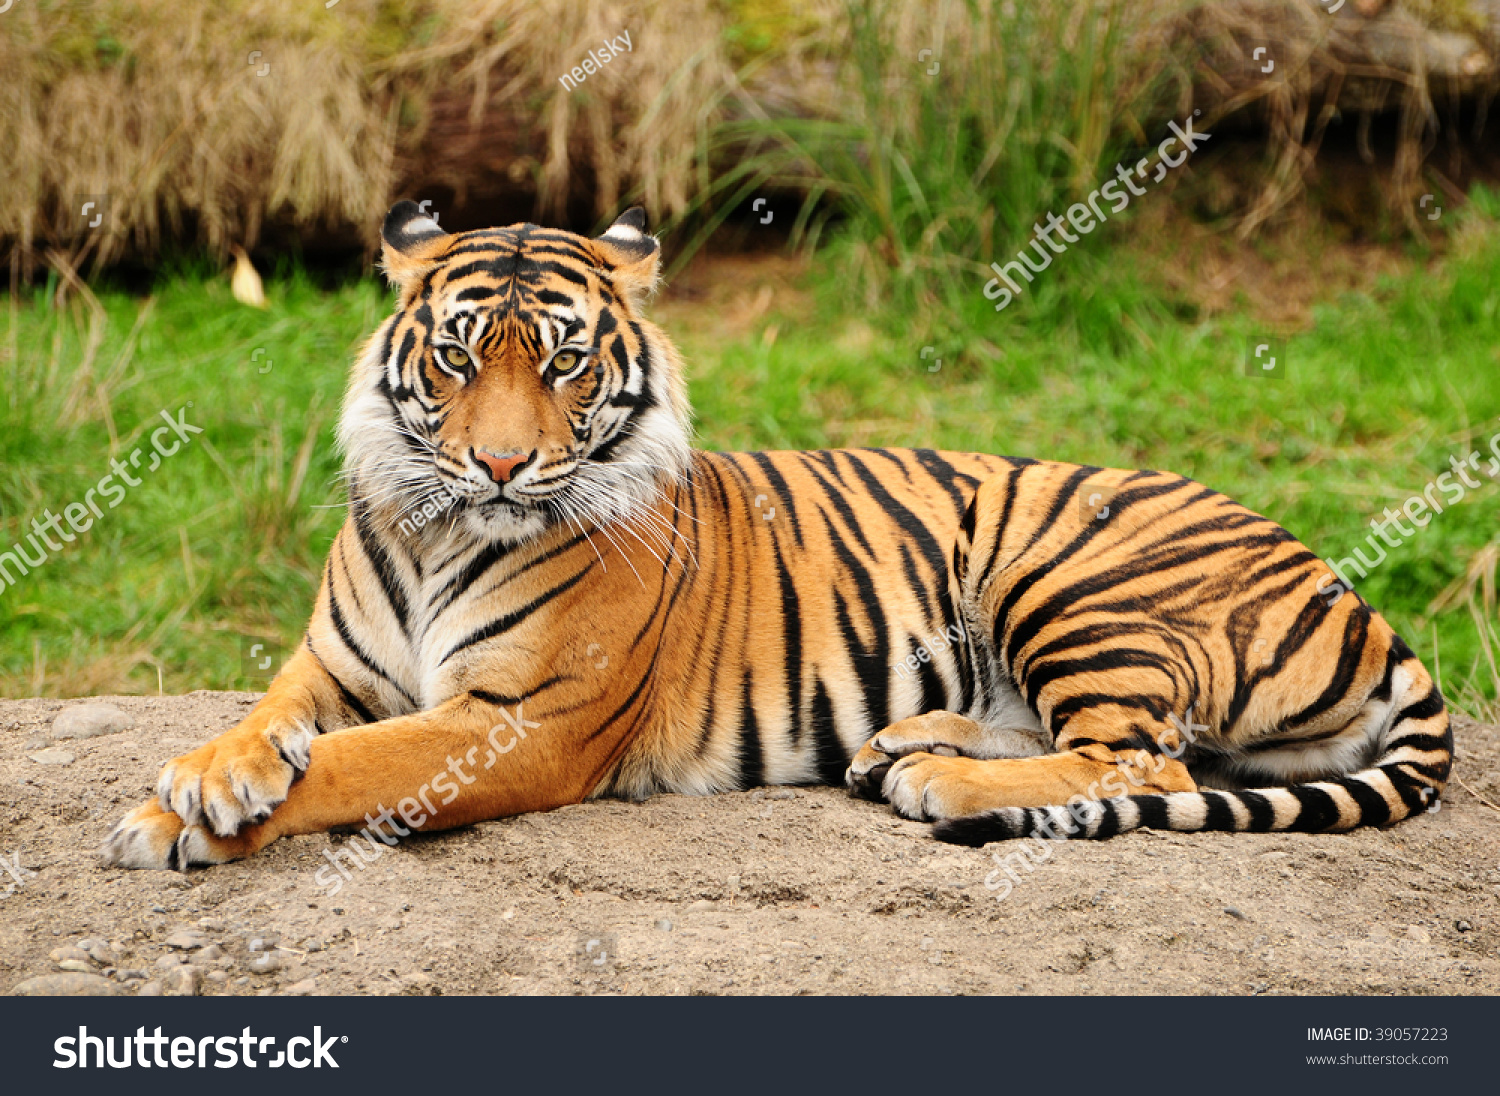 Portrait of a Royal Bengal tiger alert and staring at the camera #39057223